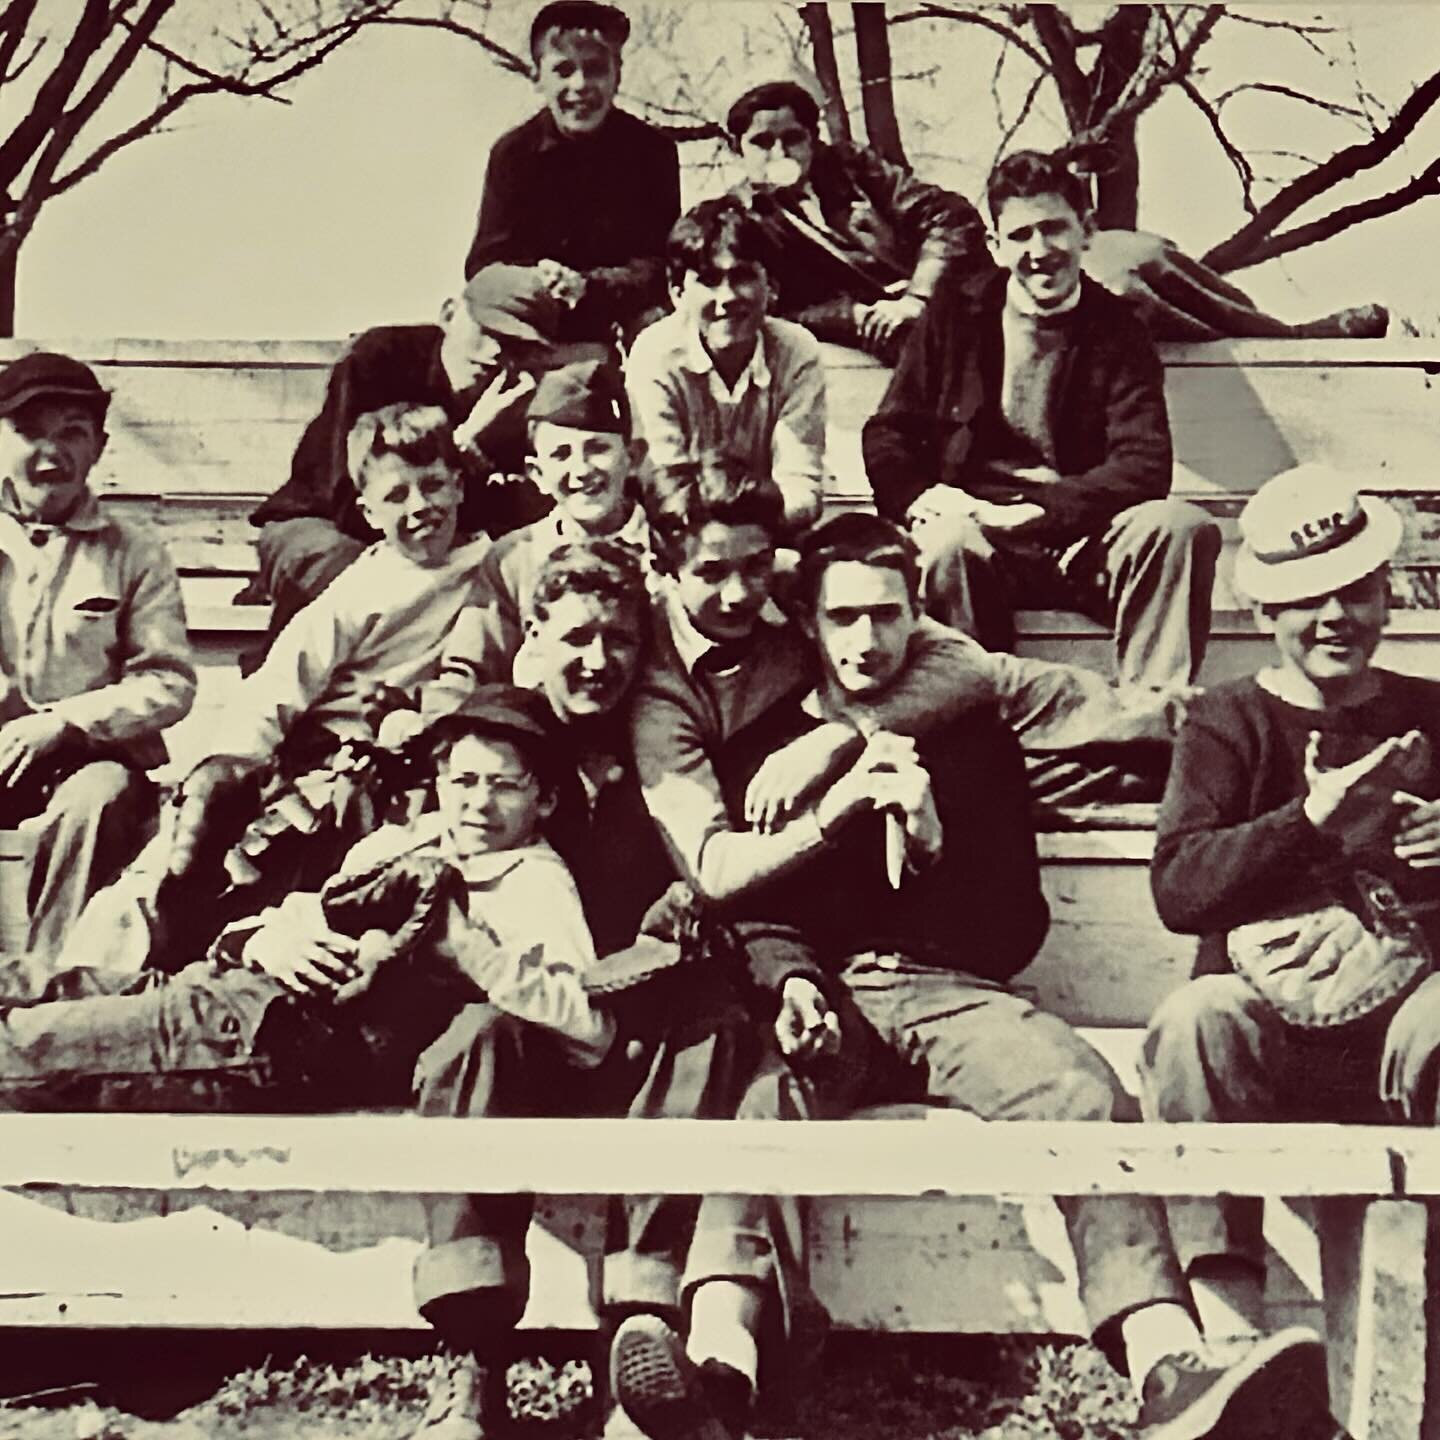 *The Gang* 
A group of local boys from the neighborhood, sitting on the bleachers either before or after a pick up baseball game at the Beachwood ballpark April 1948 ⚾️ On view at our Beechwood Meeting House and Museum - swipe to see if you recognize